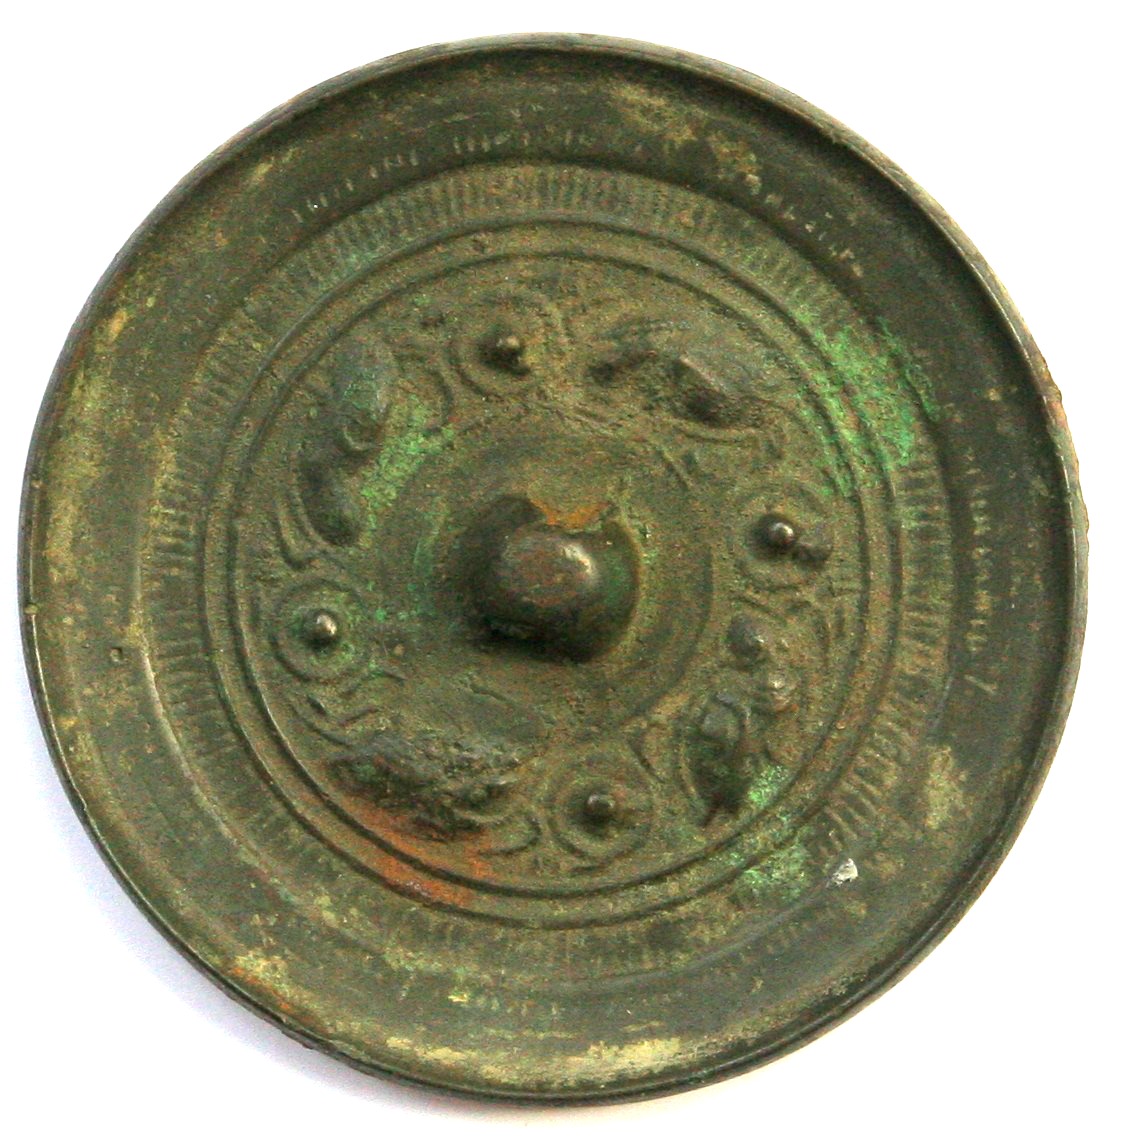 A4003, Ancient Bronze Mirror with 4 Animals, China Tang Dynasty AD 900's